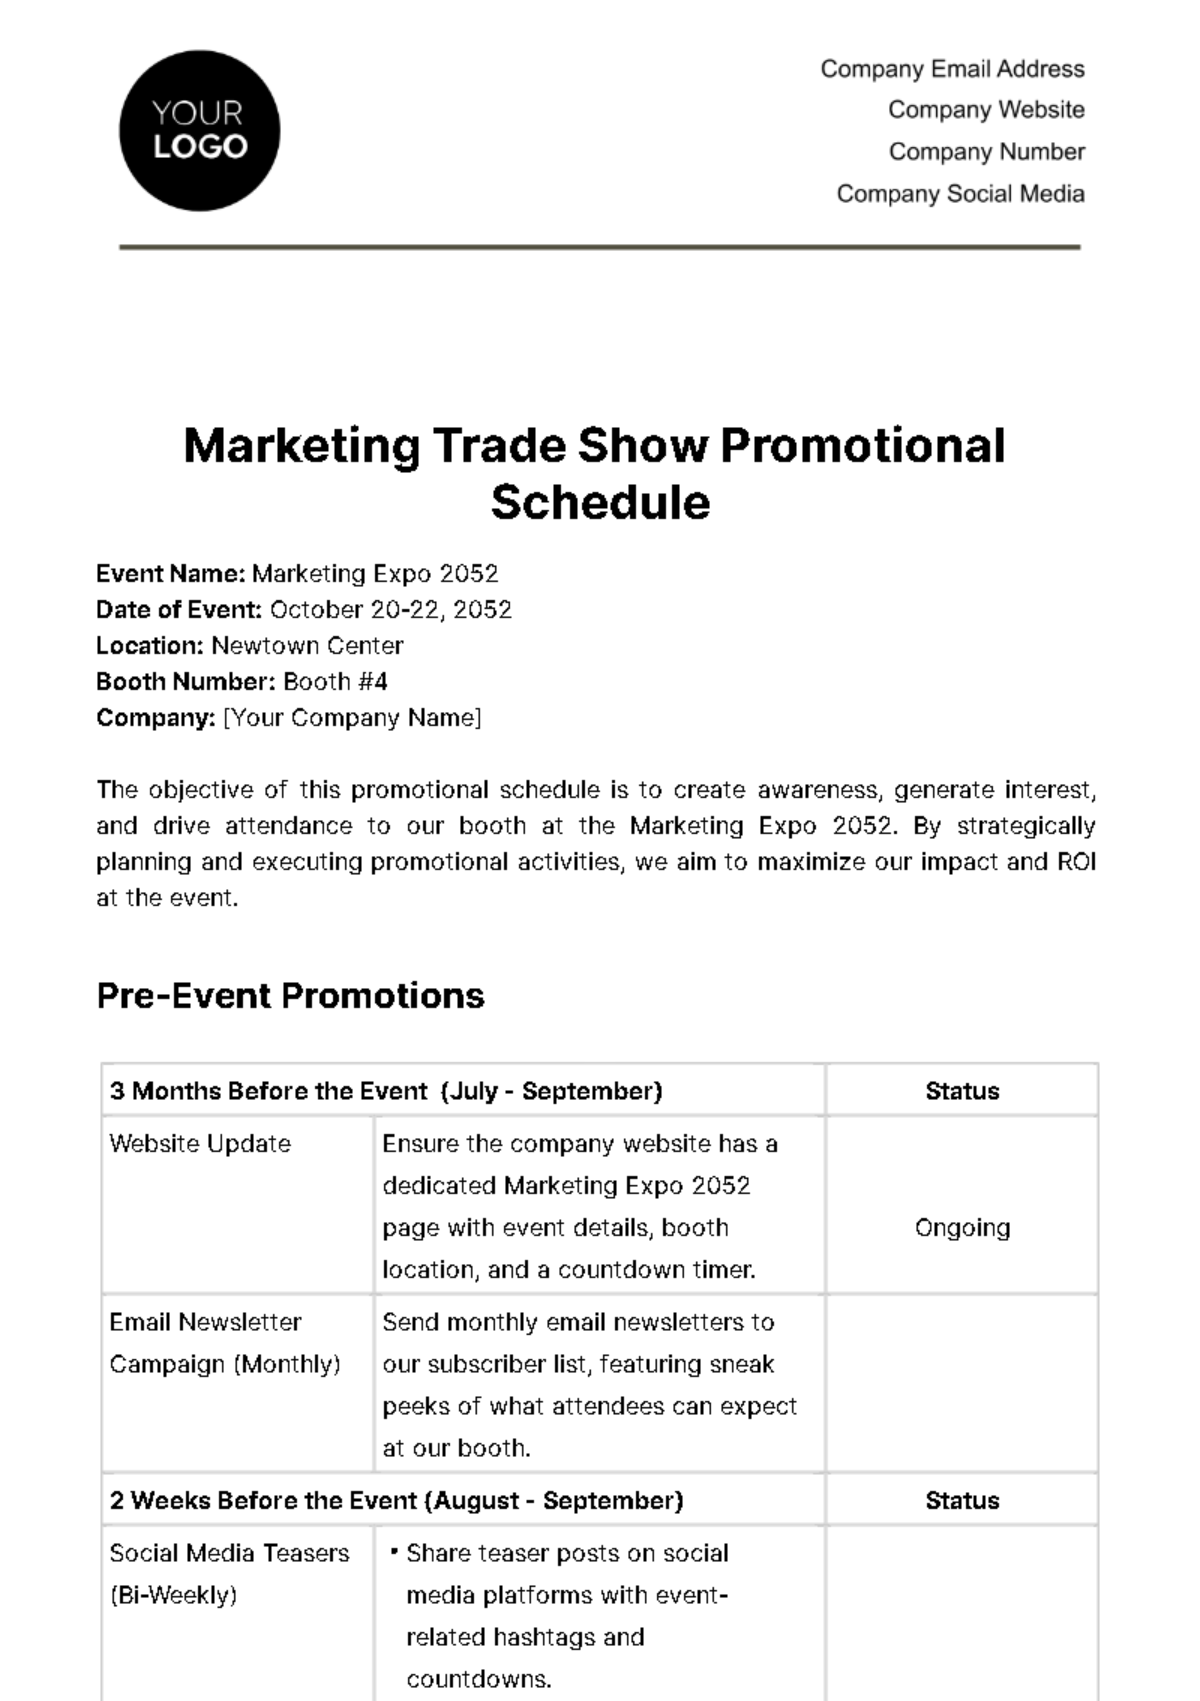 Free Marketing Trade Show Promotional Schedule Template.